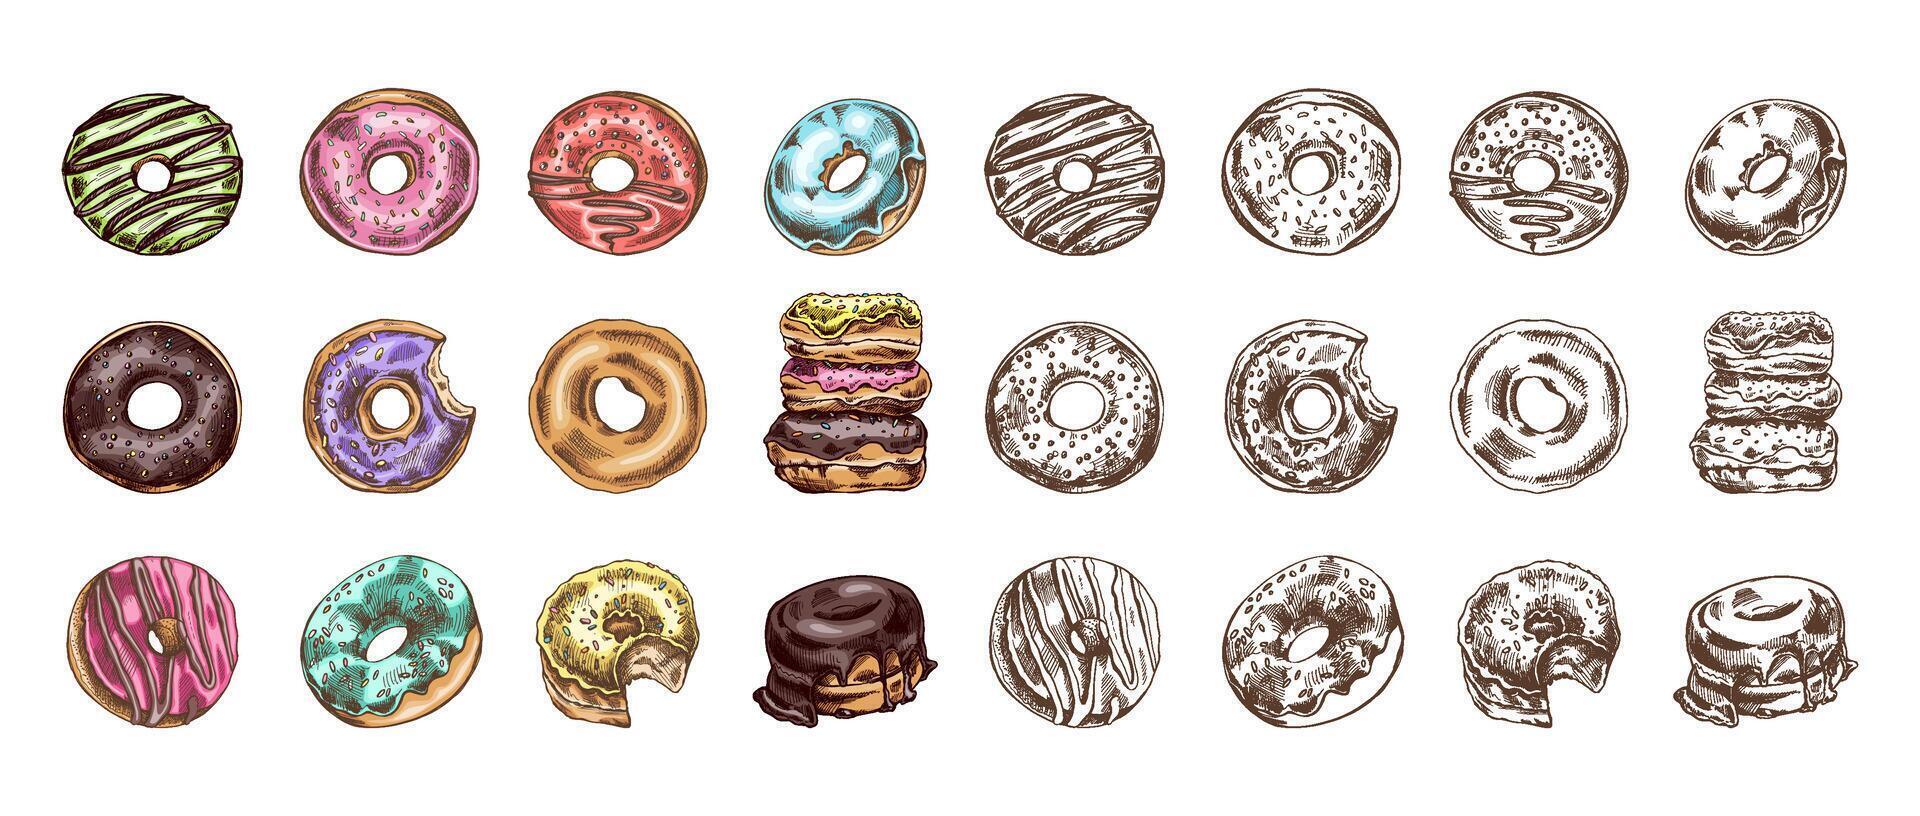 A set of hand-drawn colored and monochrome sketches of donuts. Vintage illustration. Pastry sweets, dessert. Element for the design of labels, packaging and postcards. vector